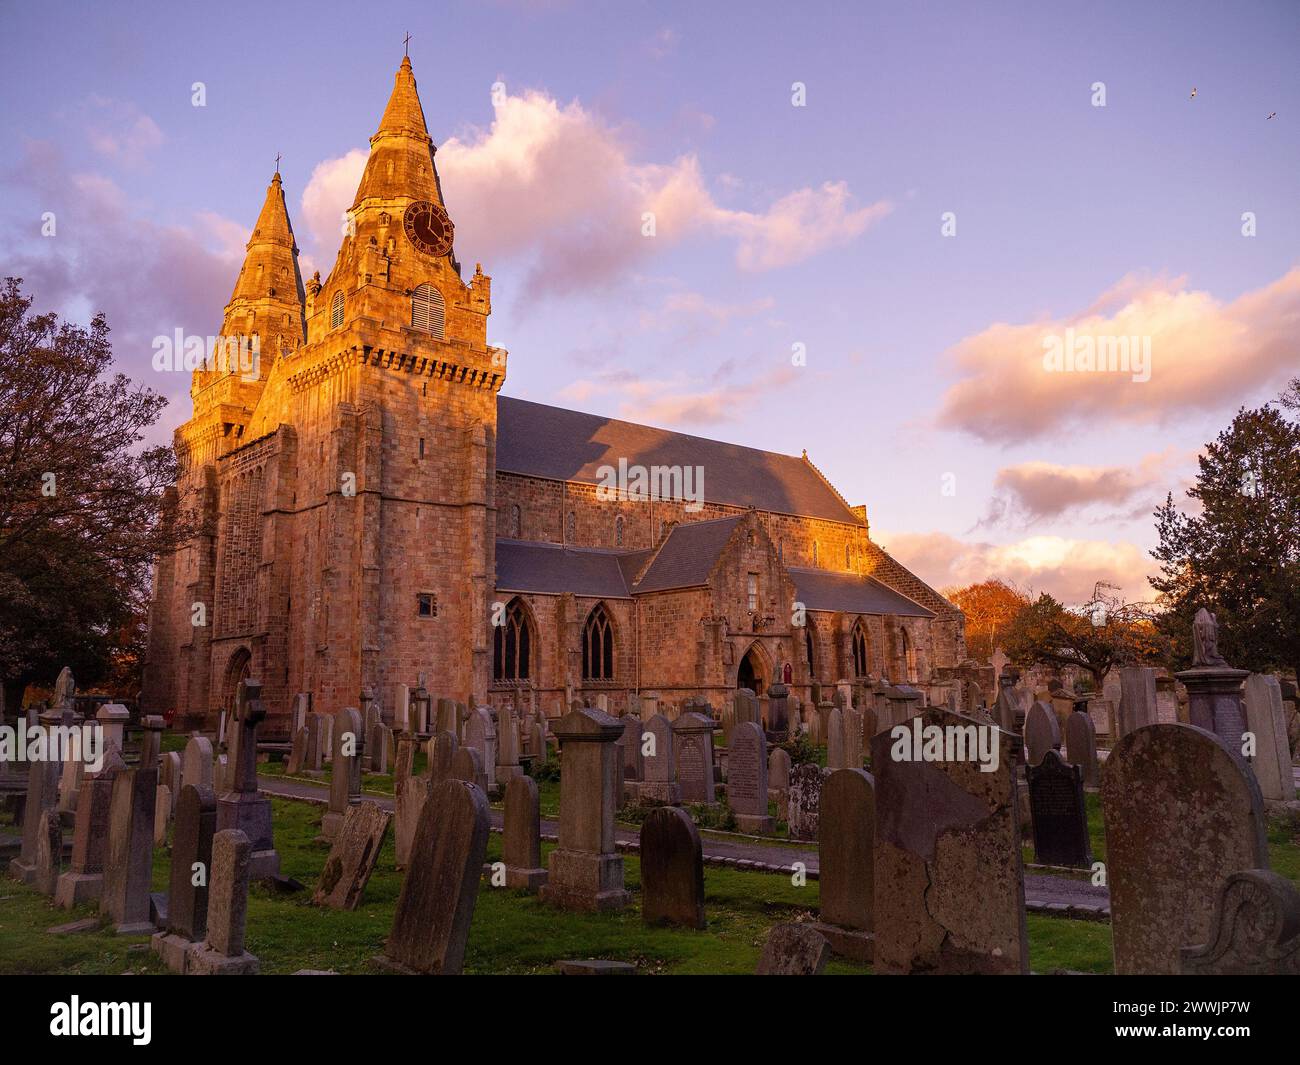 The graveyard of St Machar's Cathedral church in Autumn at sunset, The Chanonry, Old Aberdeen, Aberdeen,Aberdeenshire, Scotland, UK Stock Photo